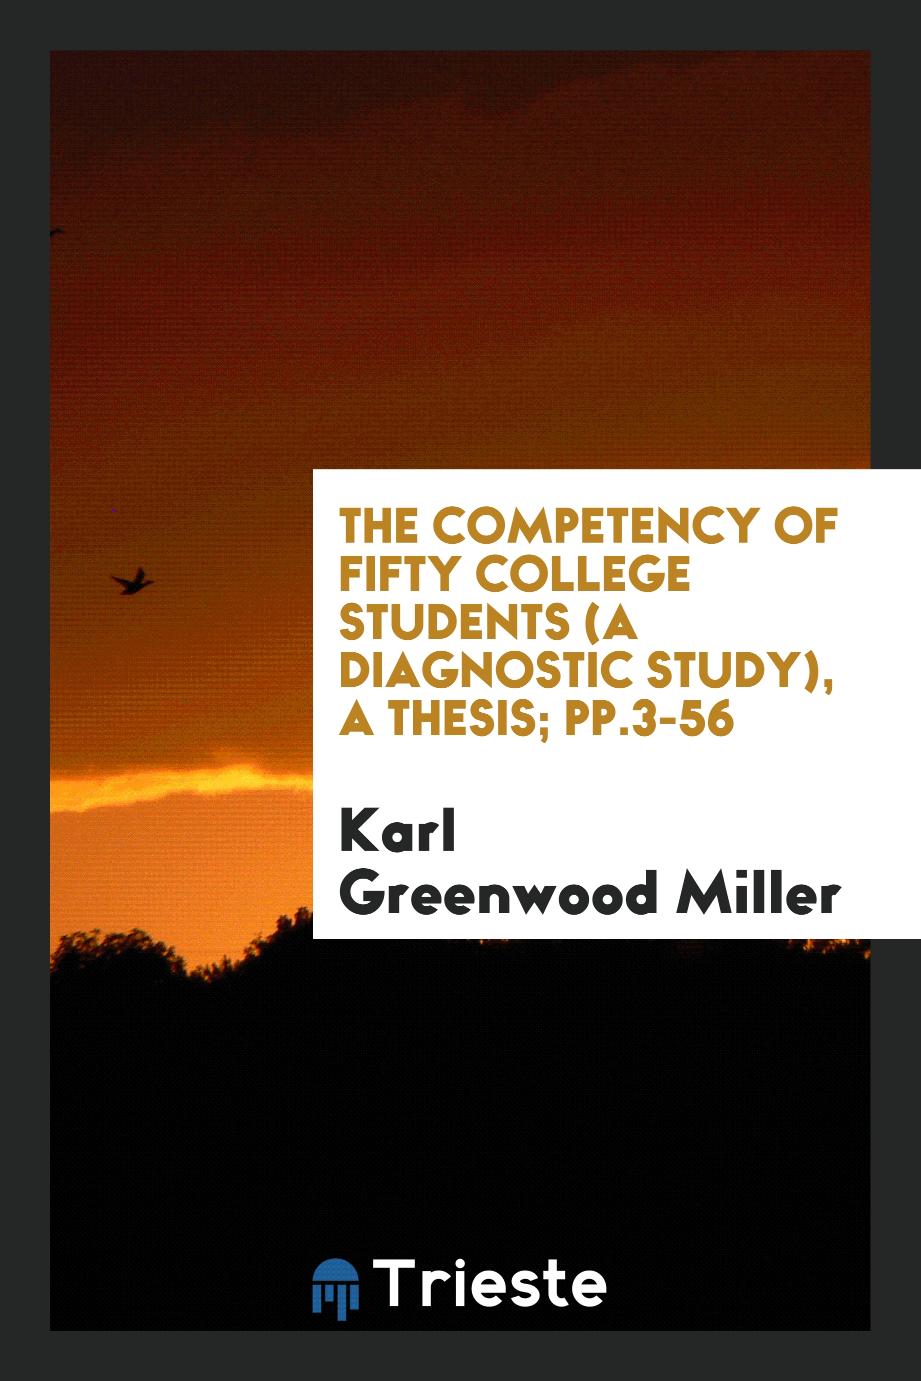 The Competency of Fifty College Students (a Diagnostic Study), a thesis; pp.3-56